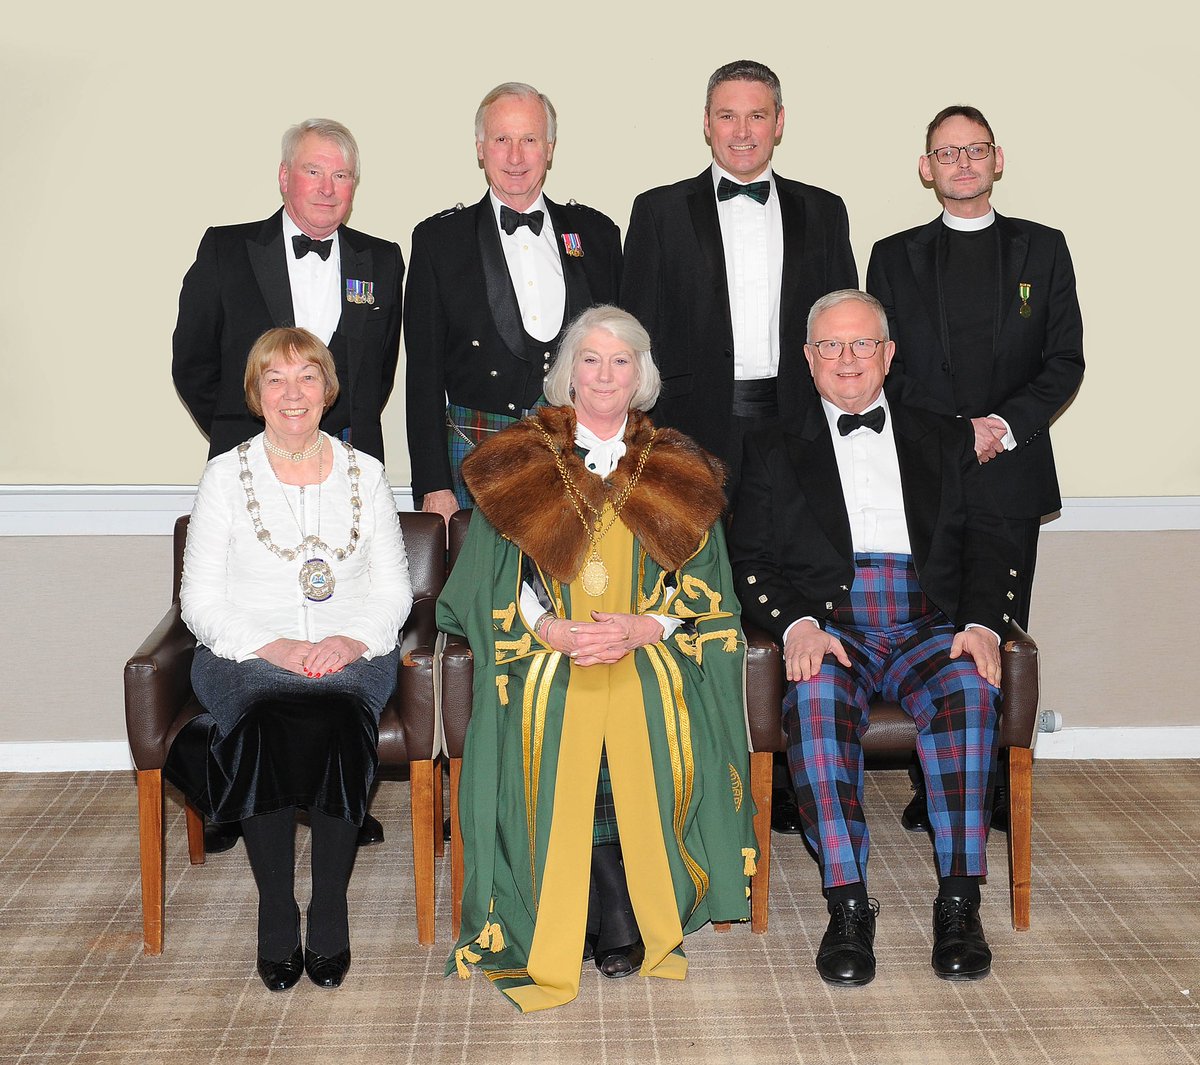 In pictures... Dean's Dinner of the Guildry of Stirling